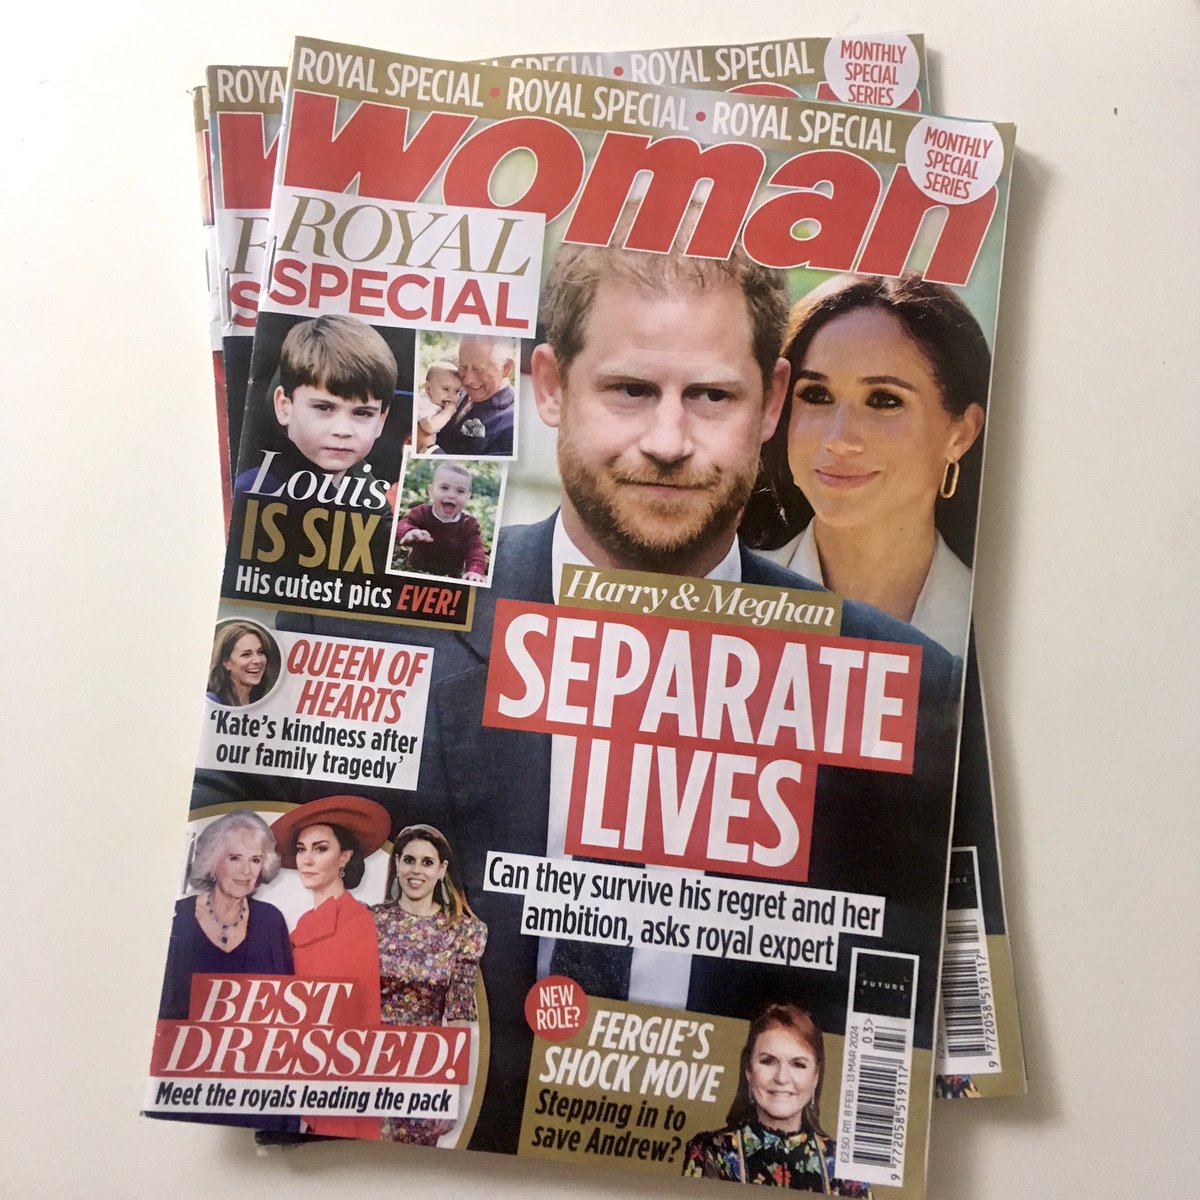 Pick up this great issue with several articles by The Royal List’s Kerry and Maria #womanmagazine #womanroyalspecial #RoyalFamily #royalnews